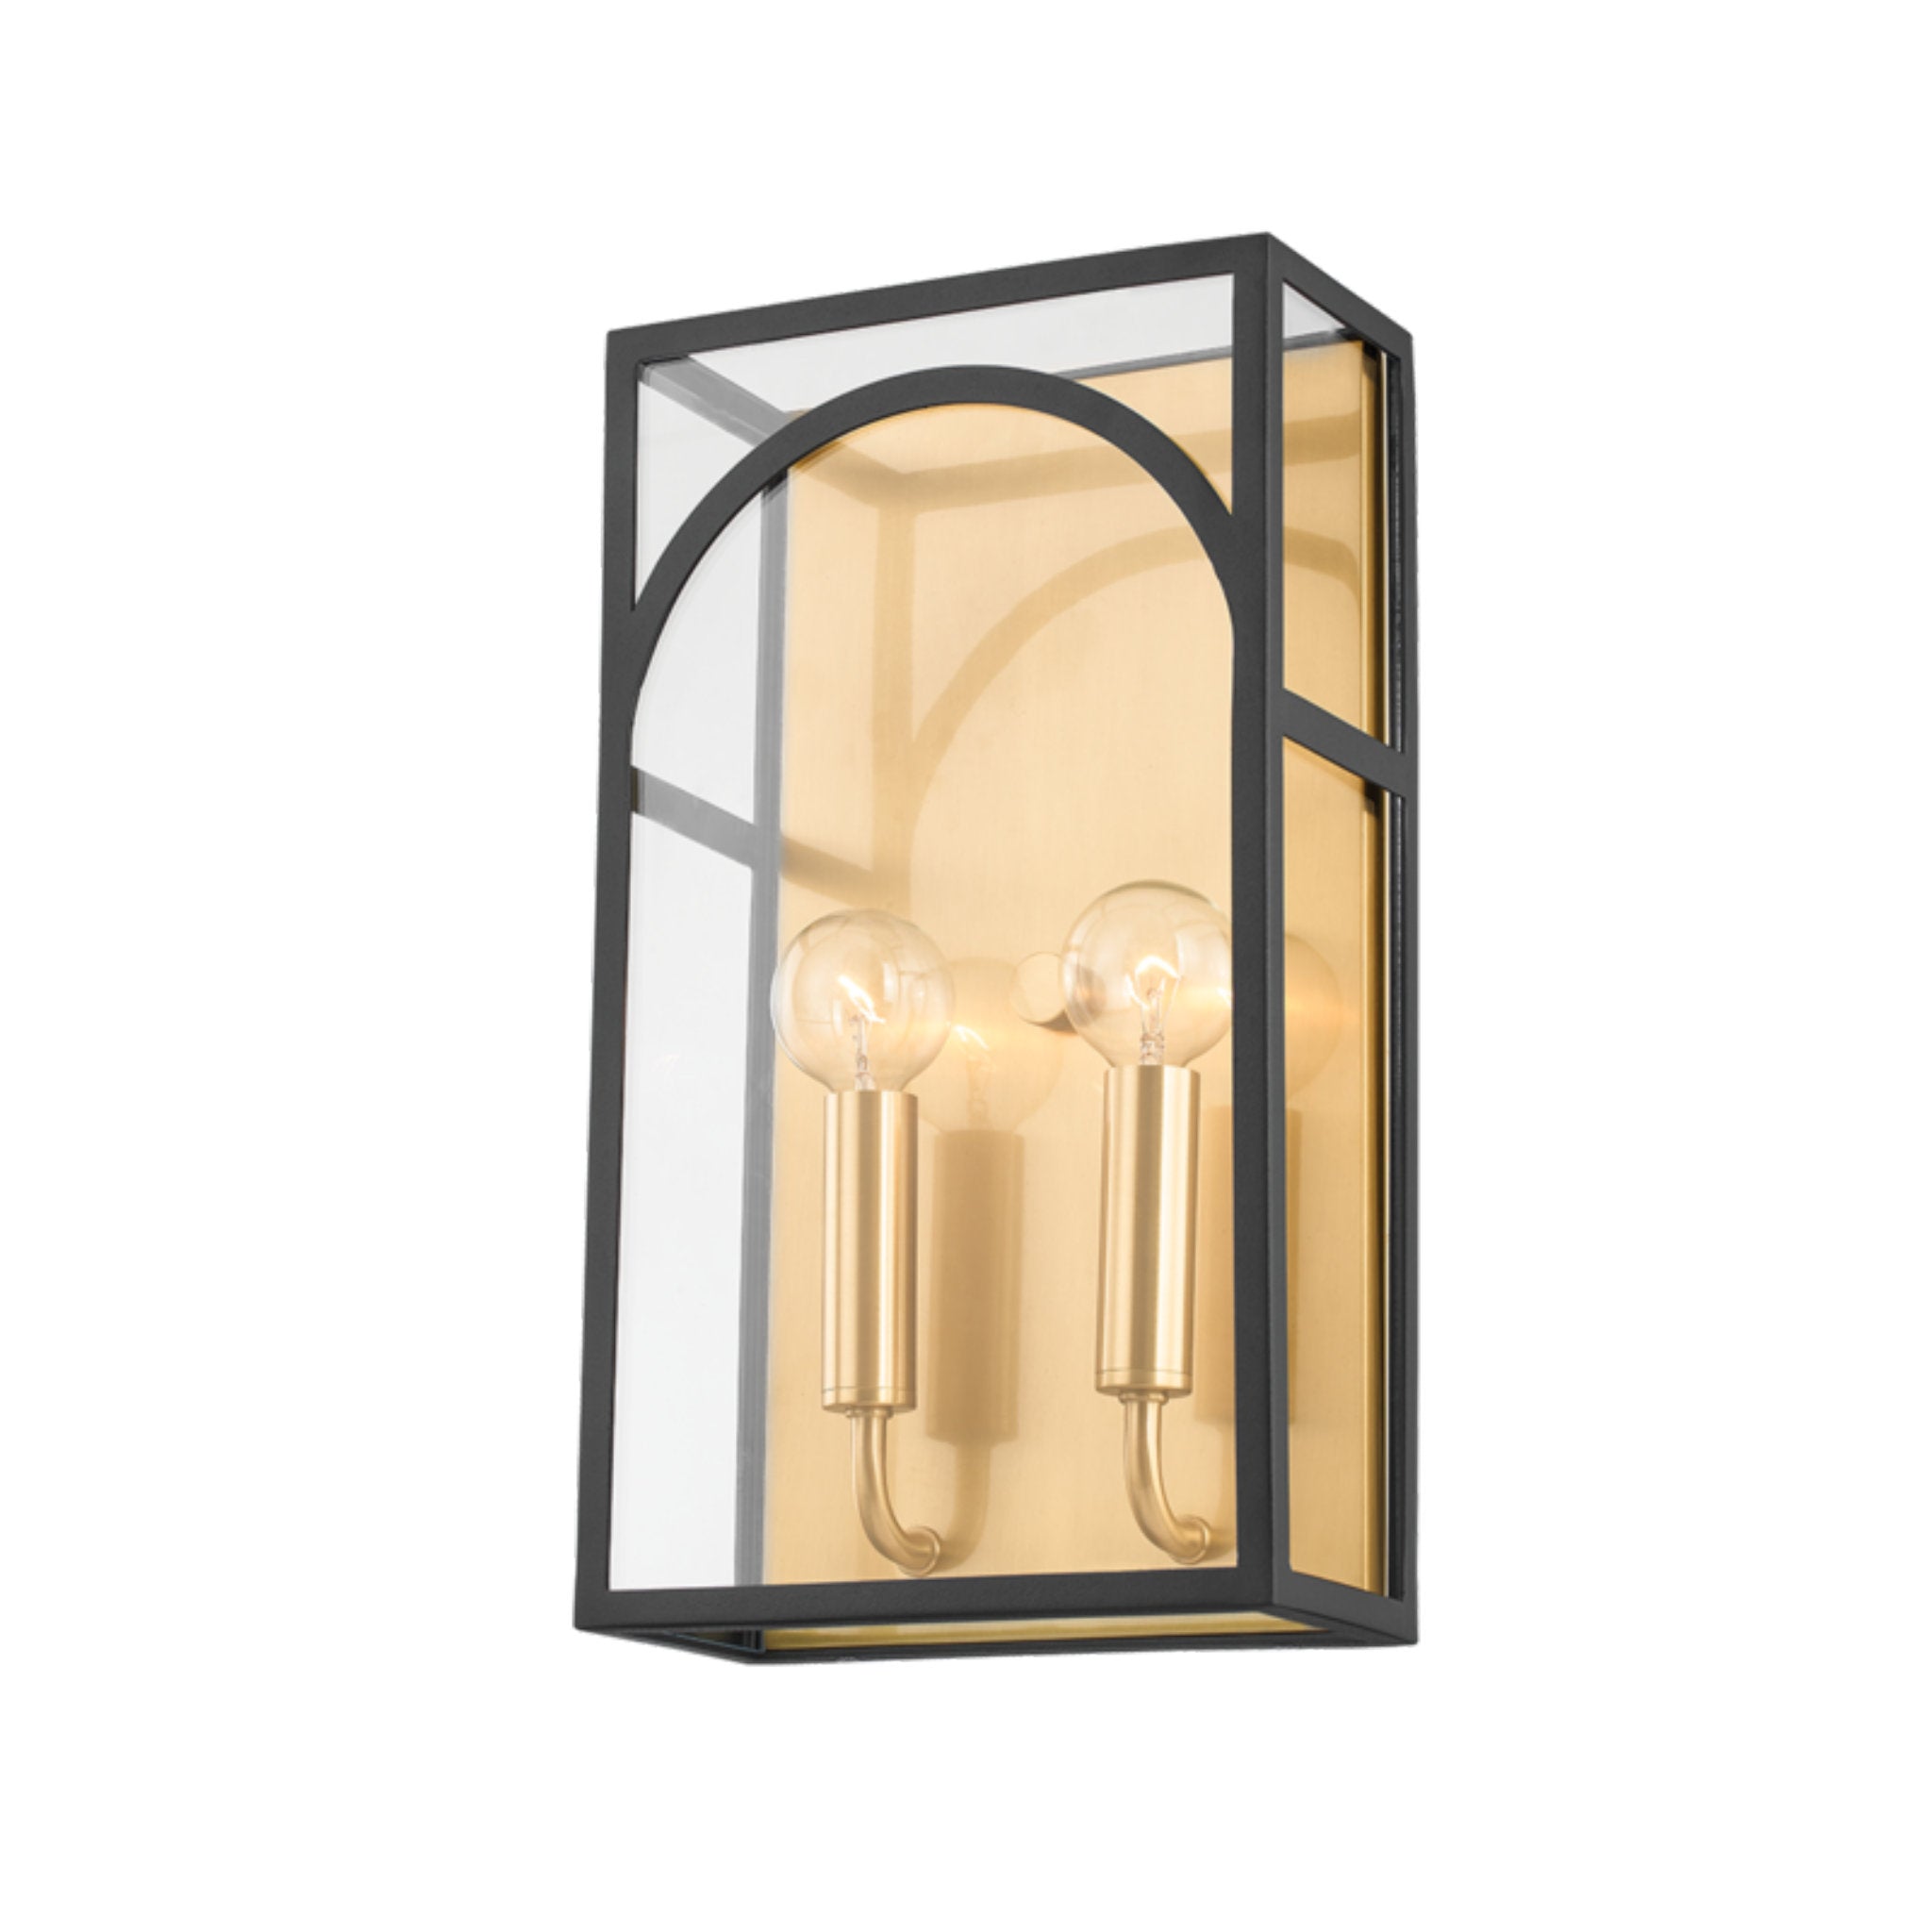 Addison 2 Light Wall Sconce in Aged Brass/Textured Black Combo